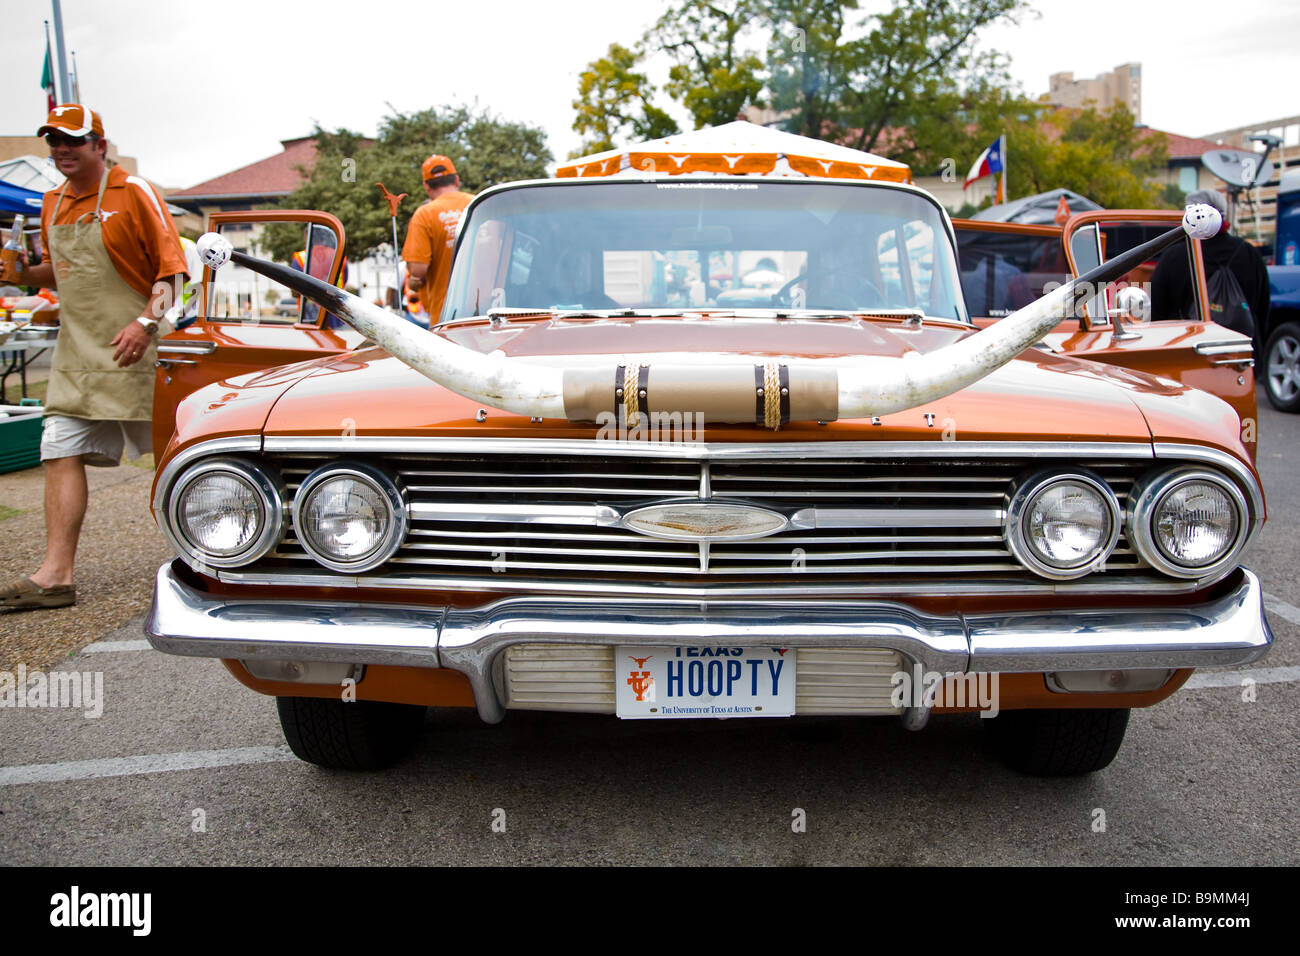 A burnt orange classic Longhorns car at a University of Texas pre-game tailgate Stock Photo